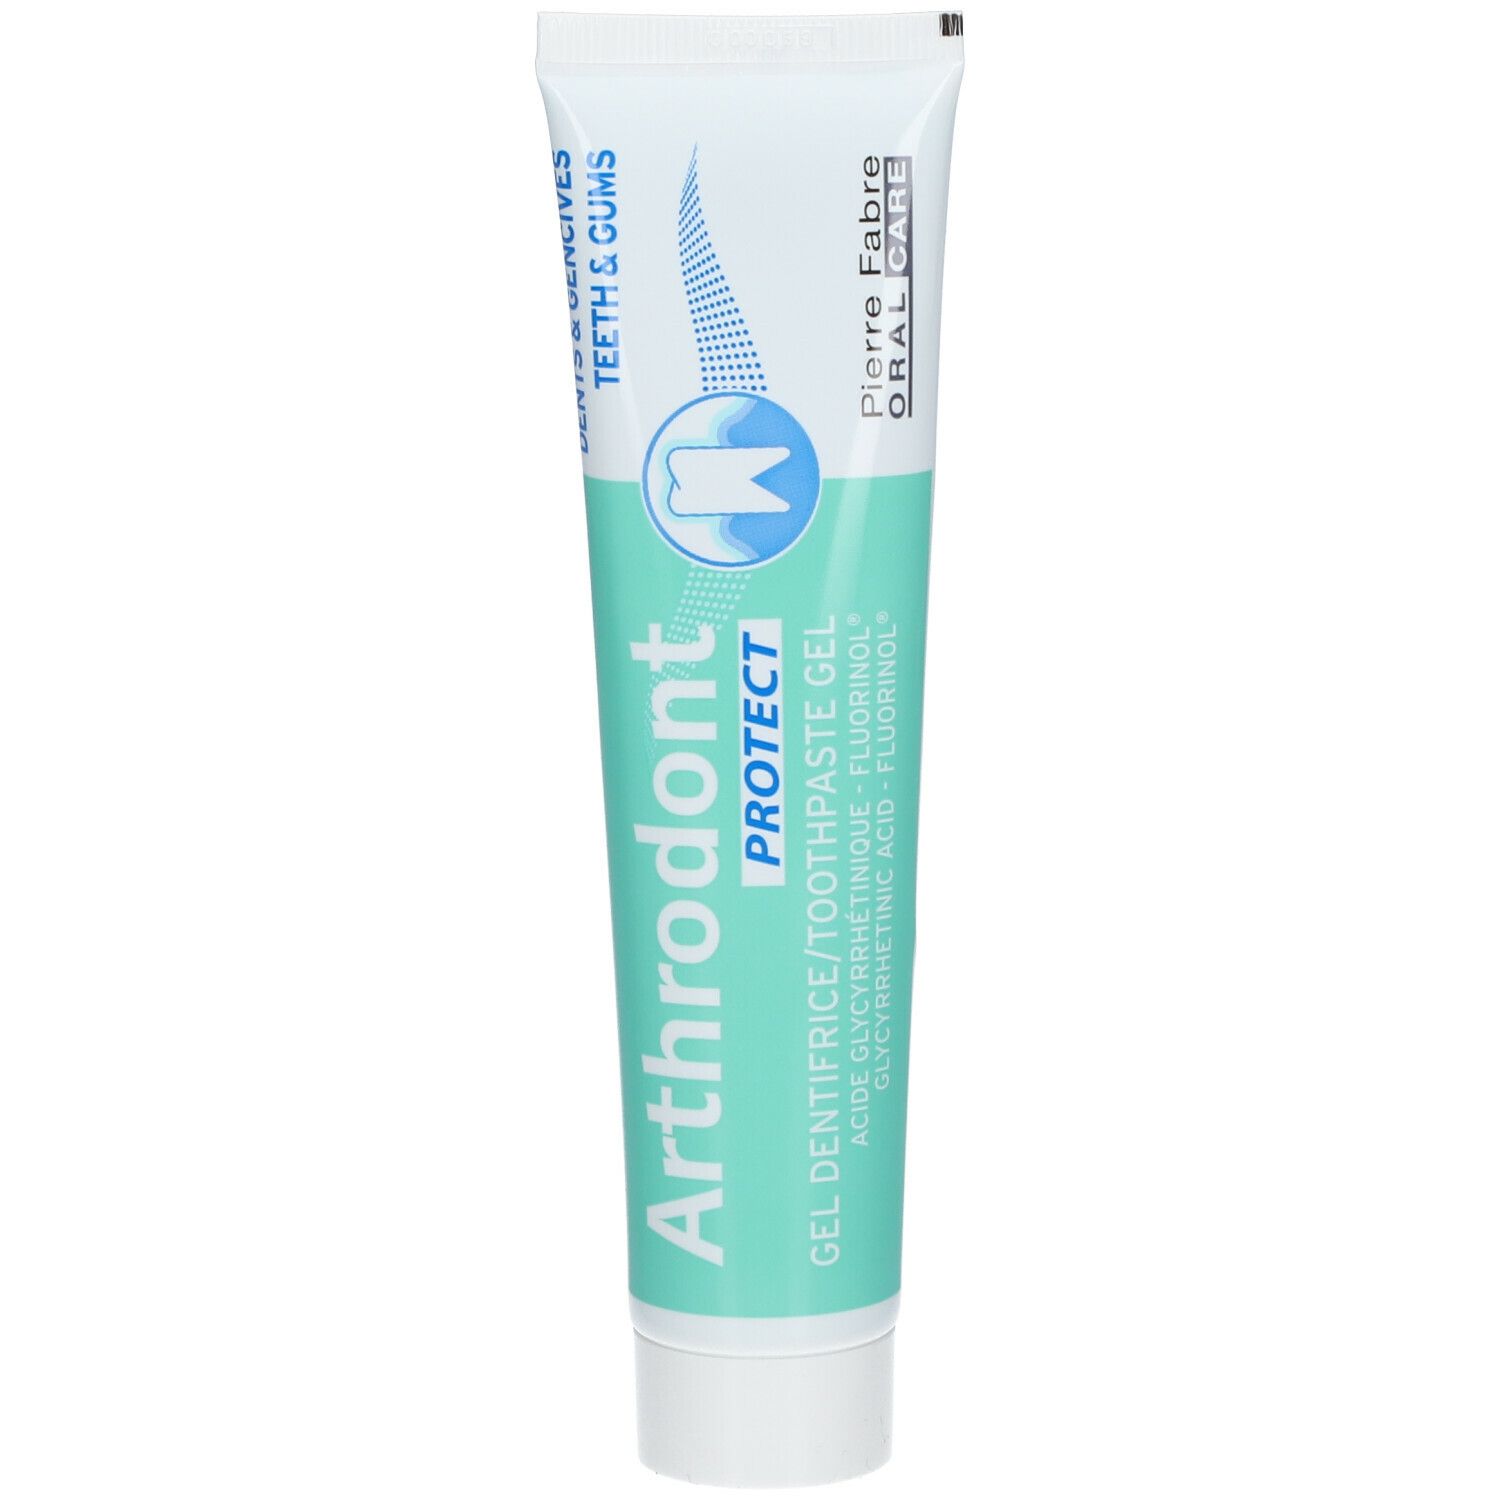 Image of Arthrodont PROTECT GEL DENTIFRICE